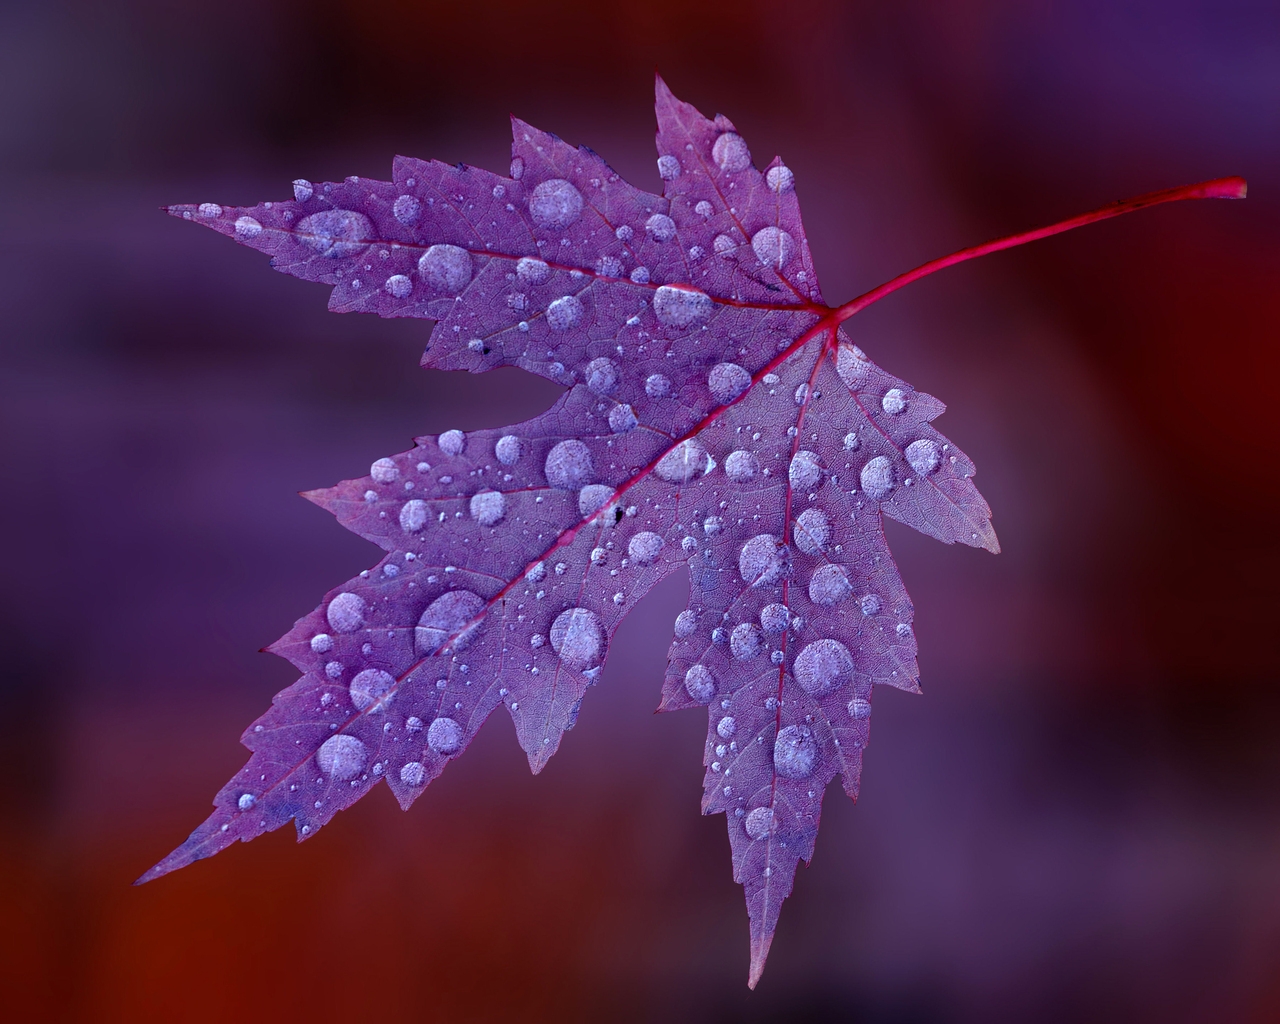 Water Drops on Purple Leaf  for 1280 x 1024 resolution